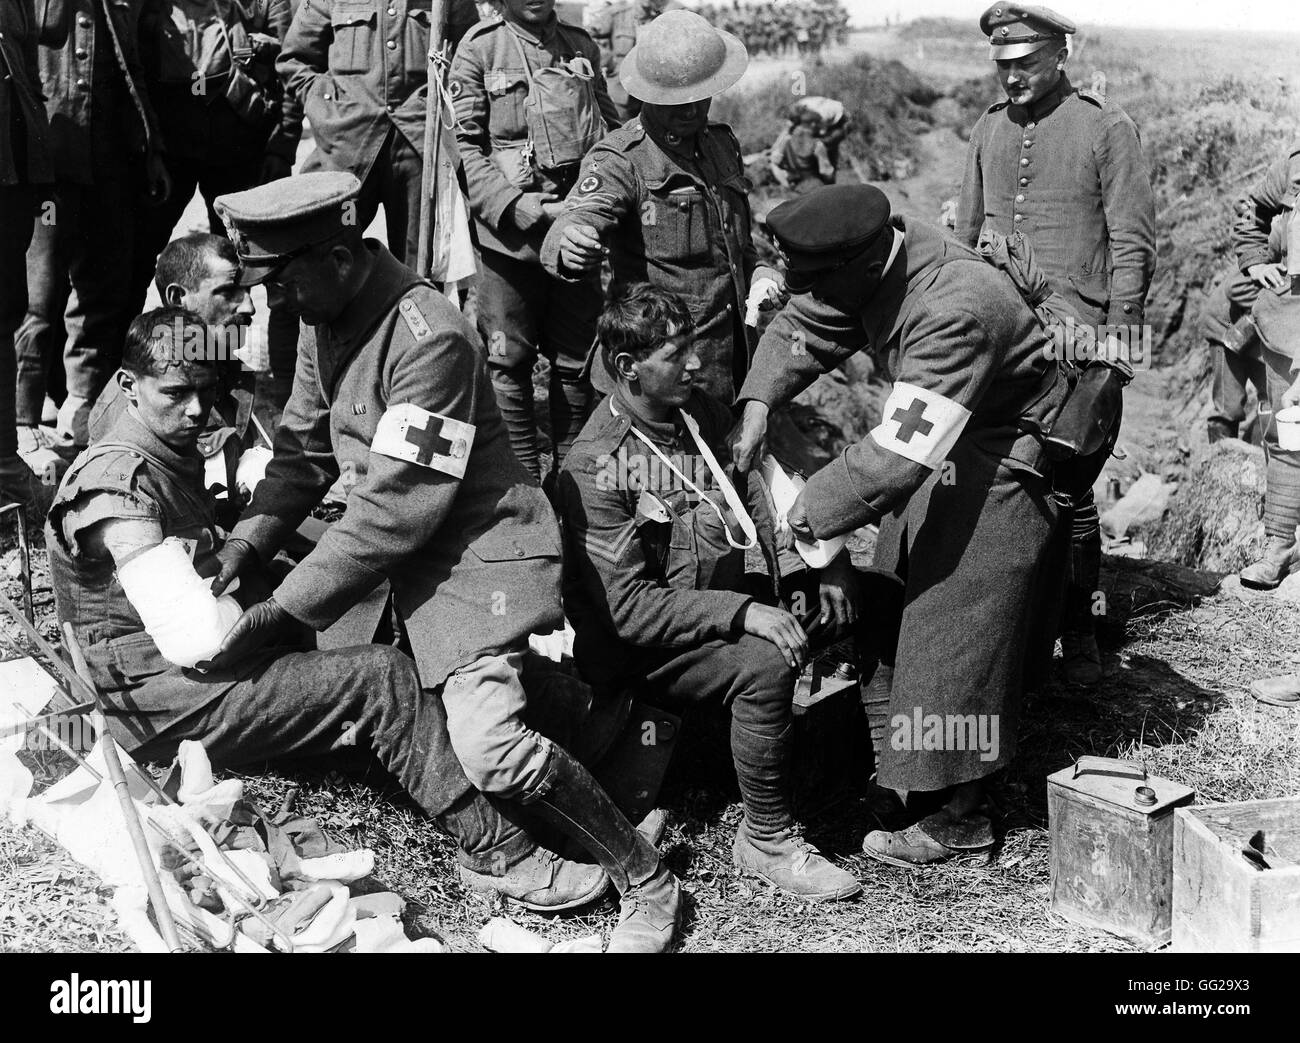 The Second Battle of the Somme German physicists (prisoners) taking care of the British wounded soldiers in Grevillers (France) August 1918 France, World War I London, Imperial war museum Stock Photo